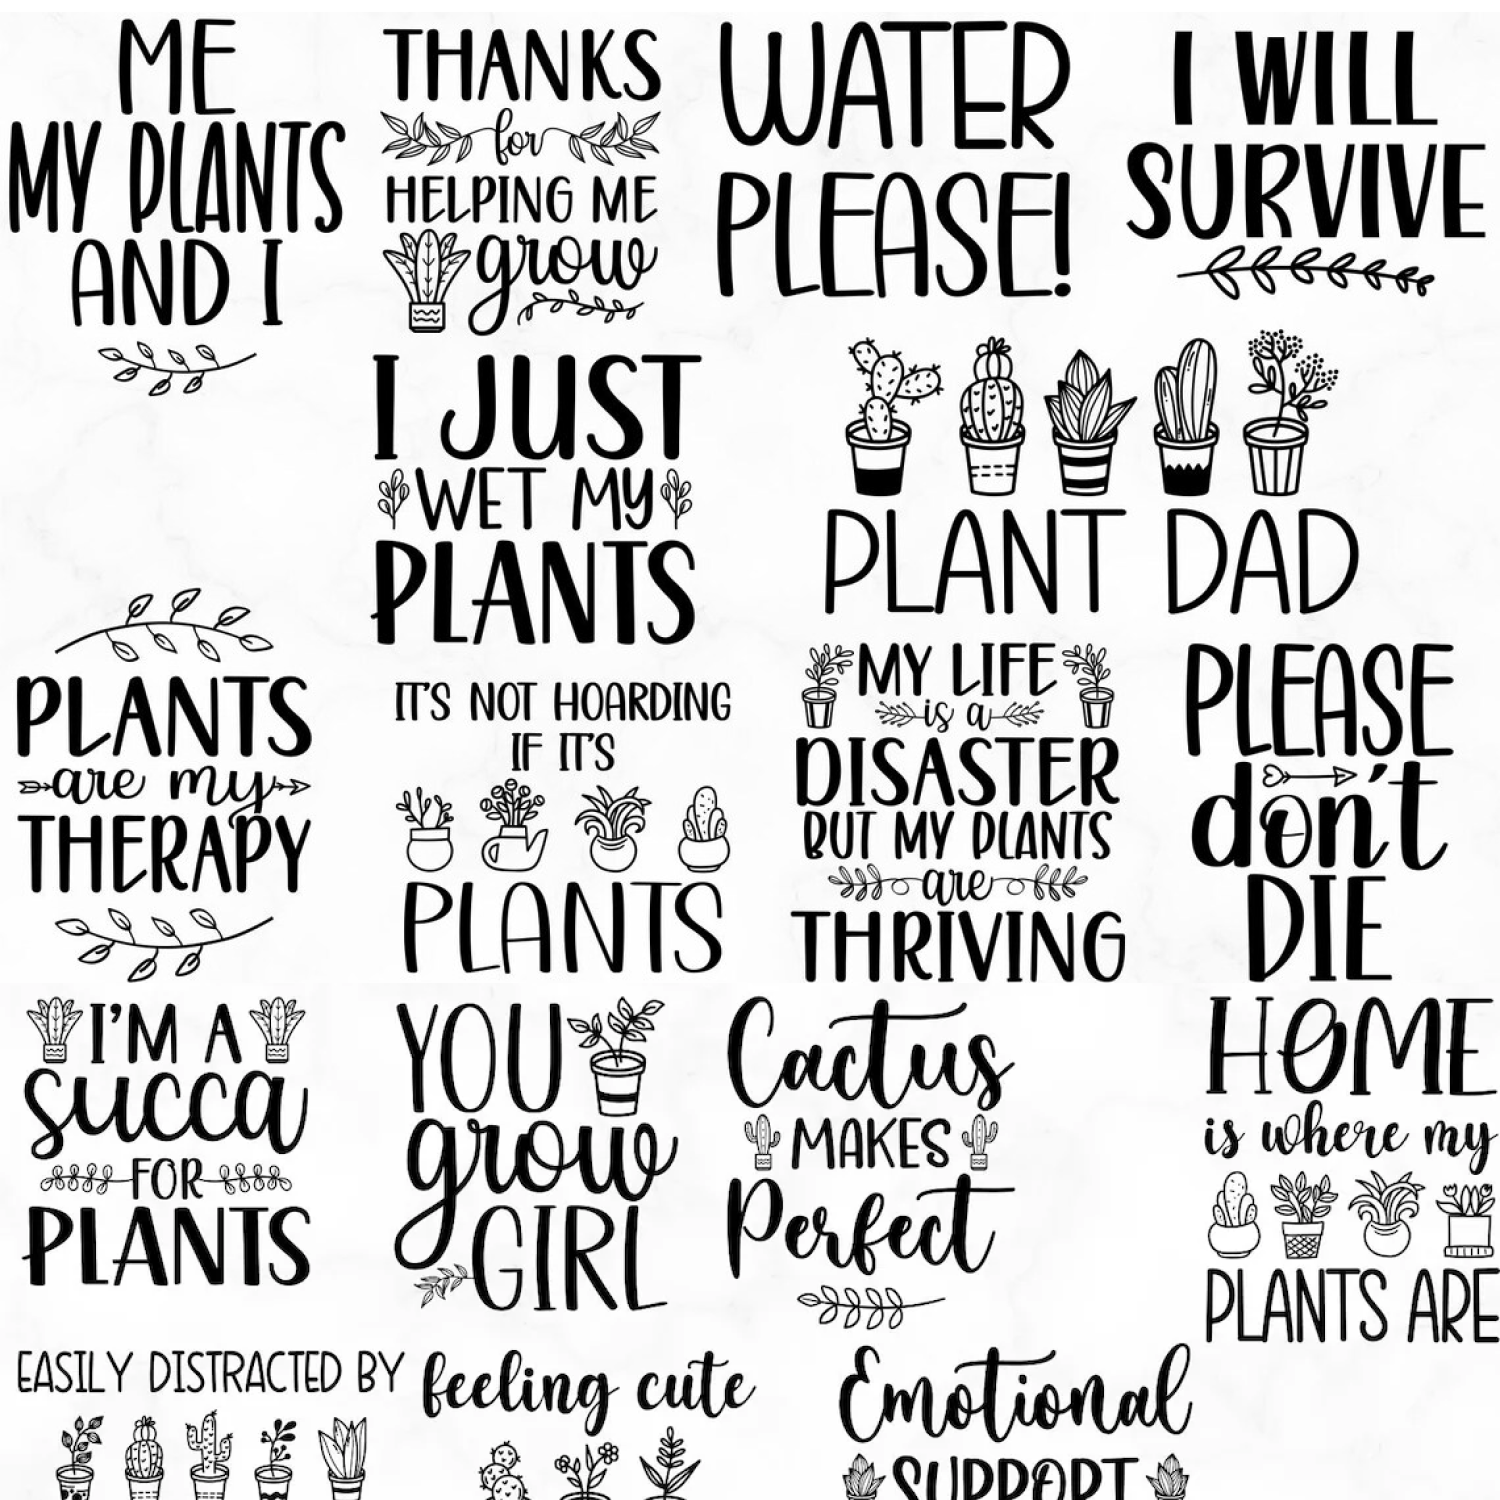 Water please, Plant dad.